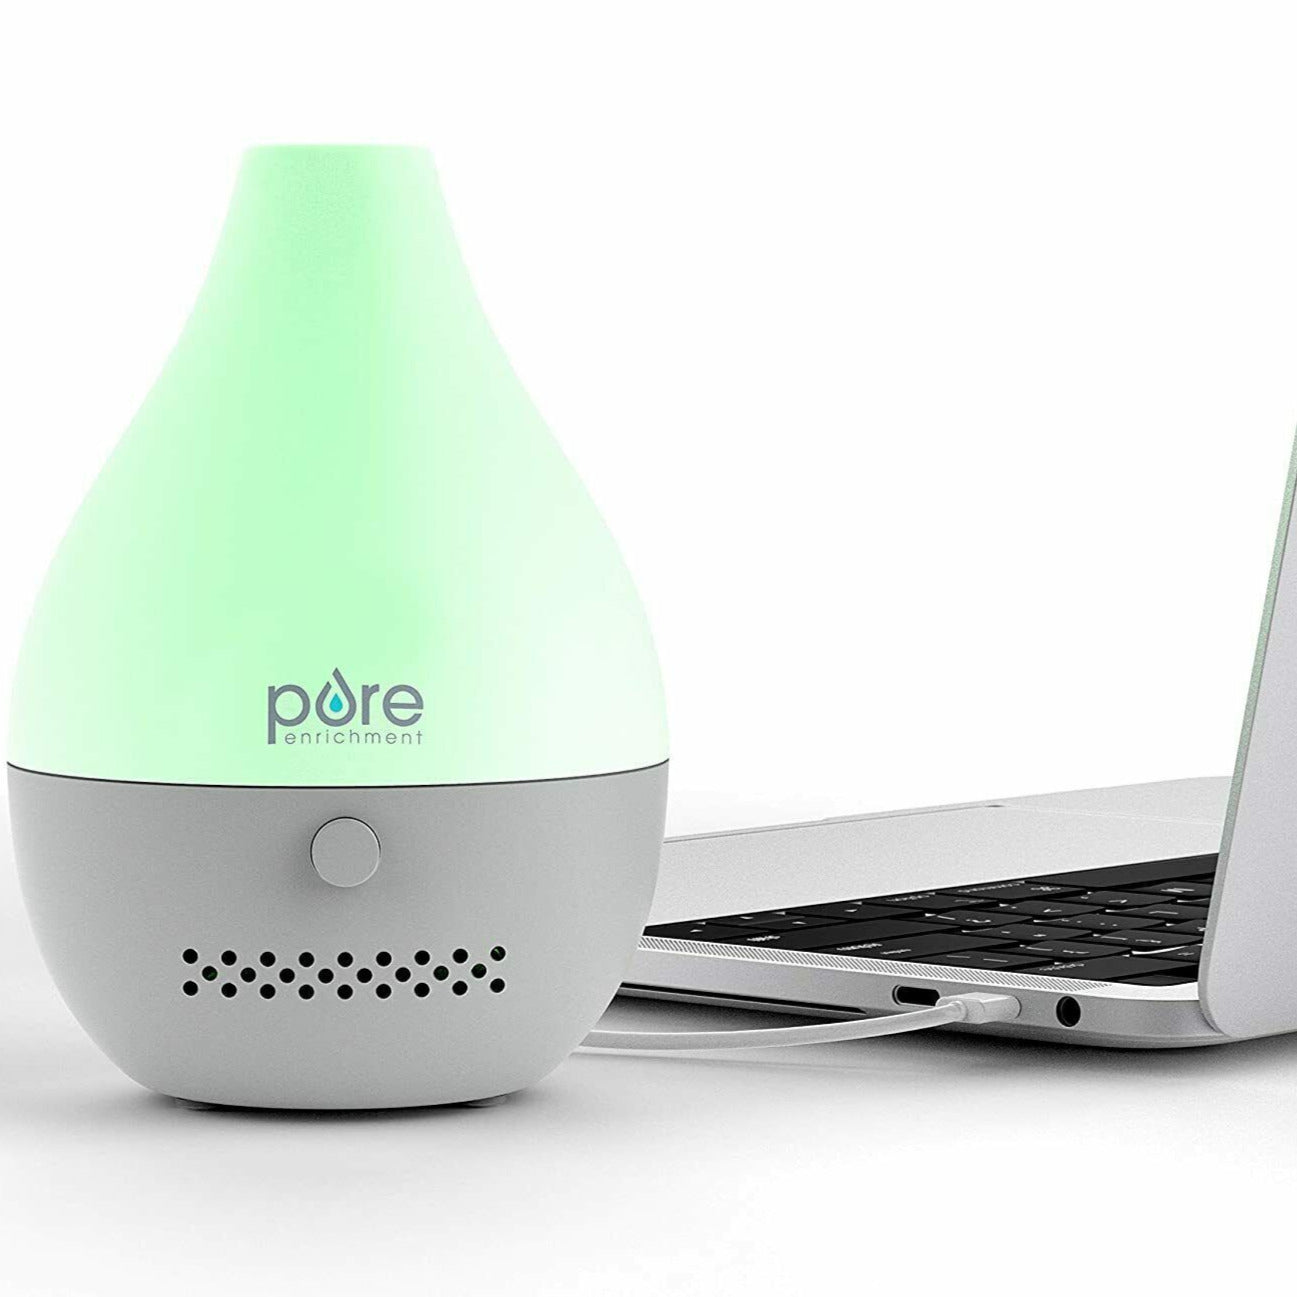 USB-powered ultrasonic oil diffuser next to a laptop with a hidden WiFi camera.